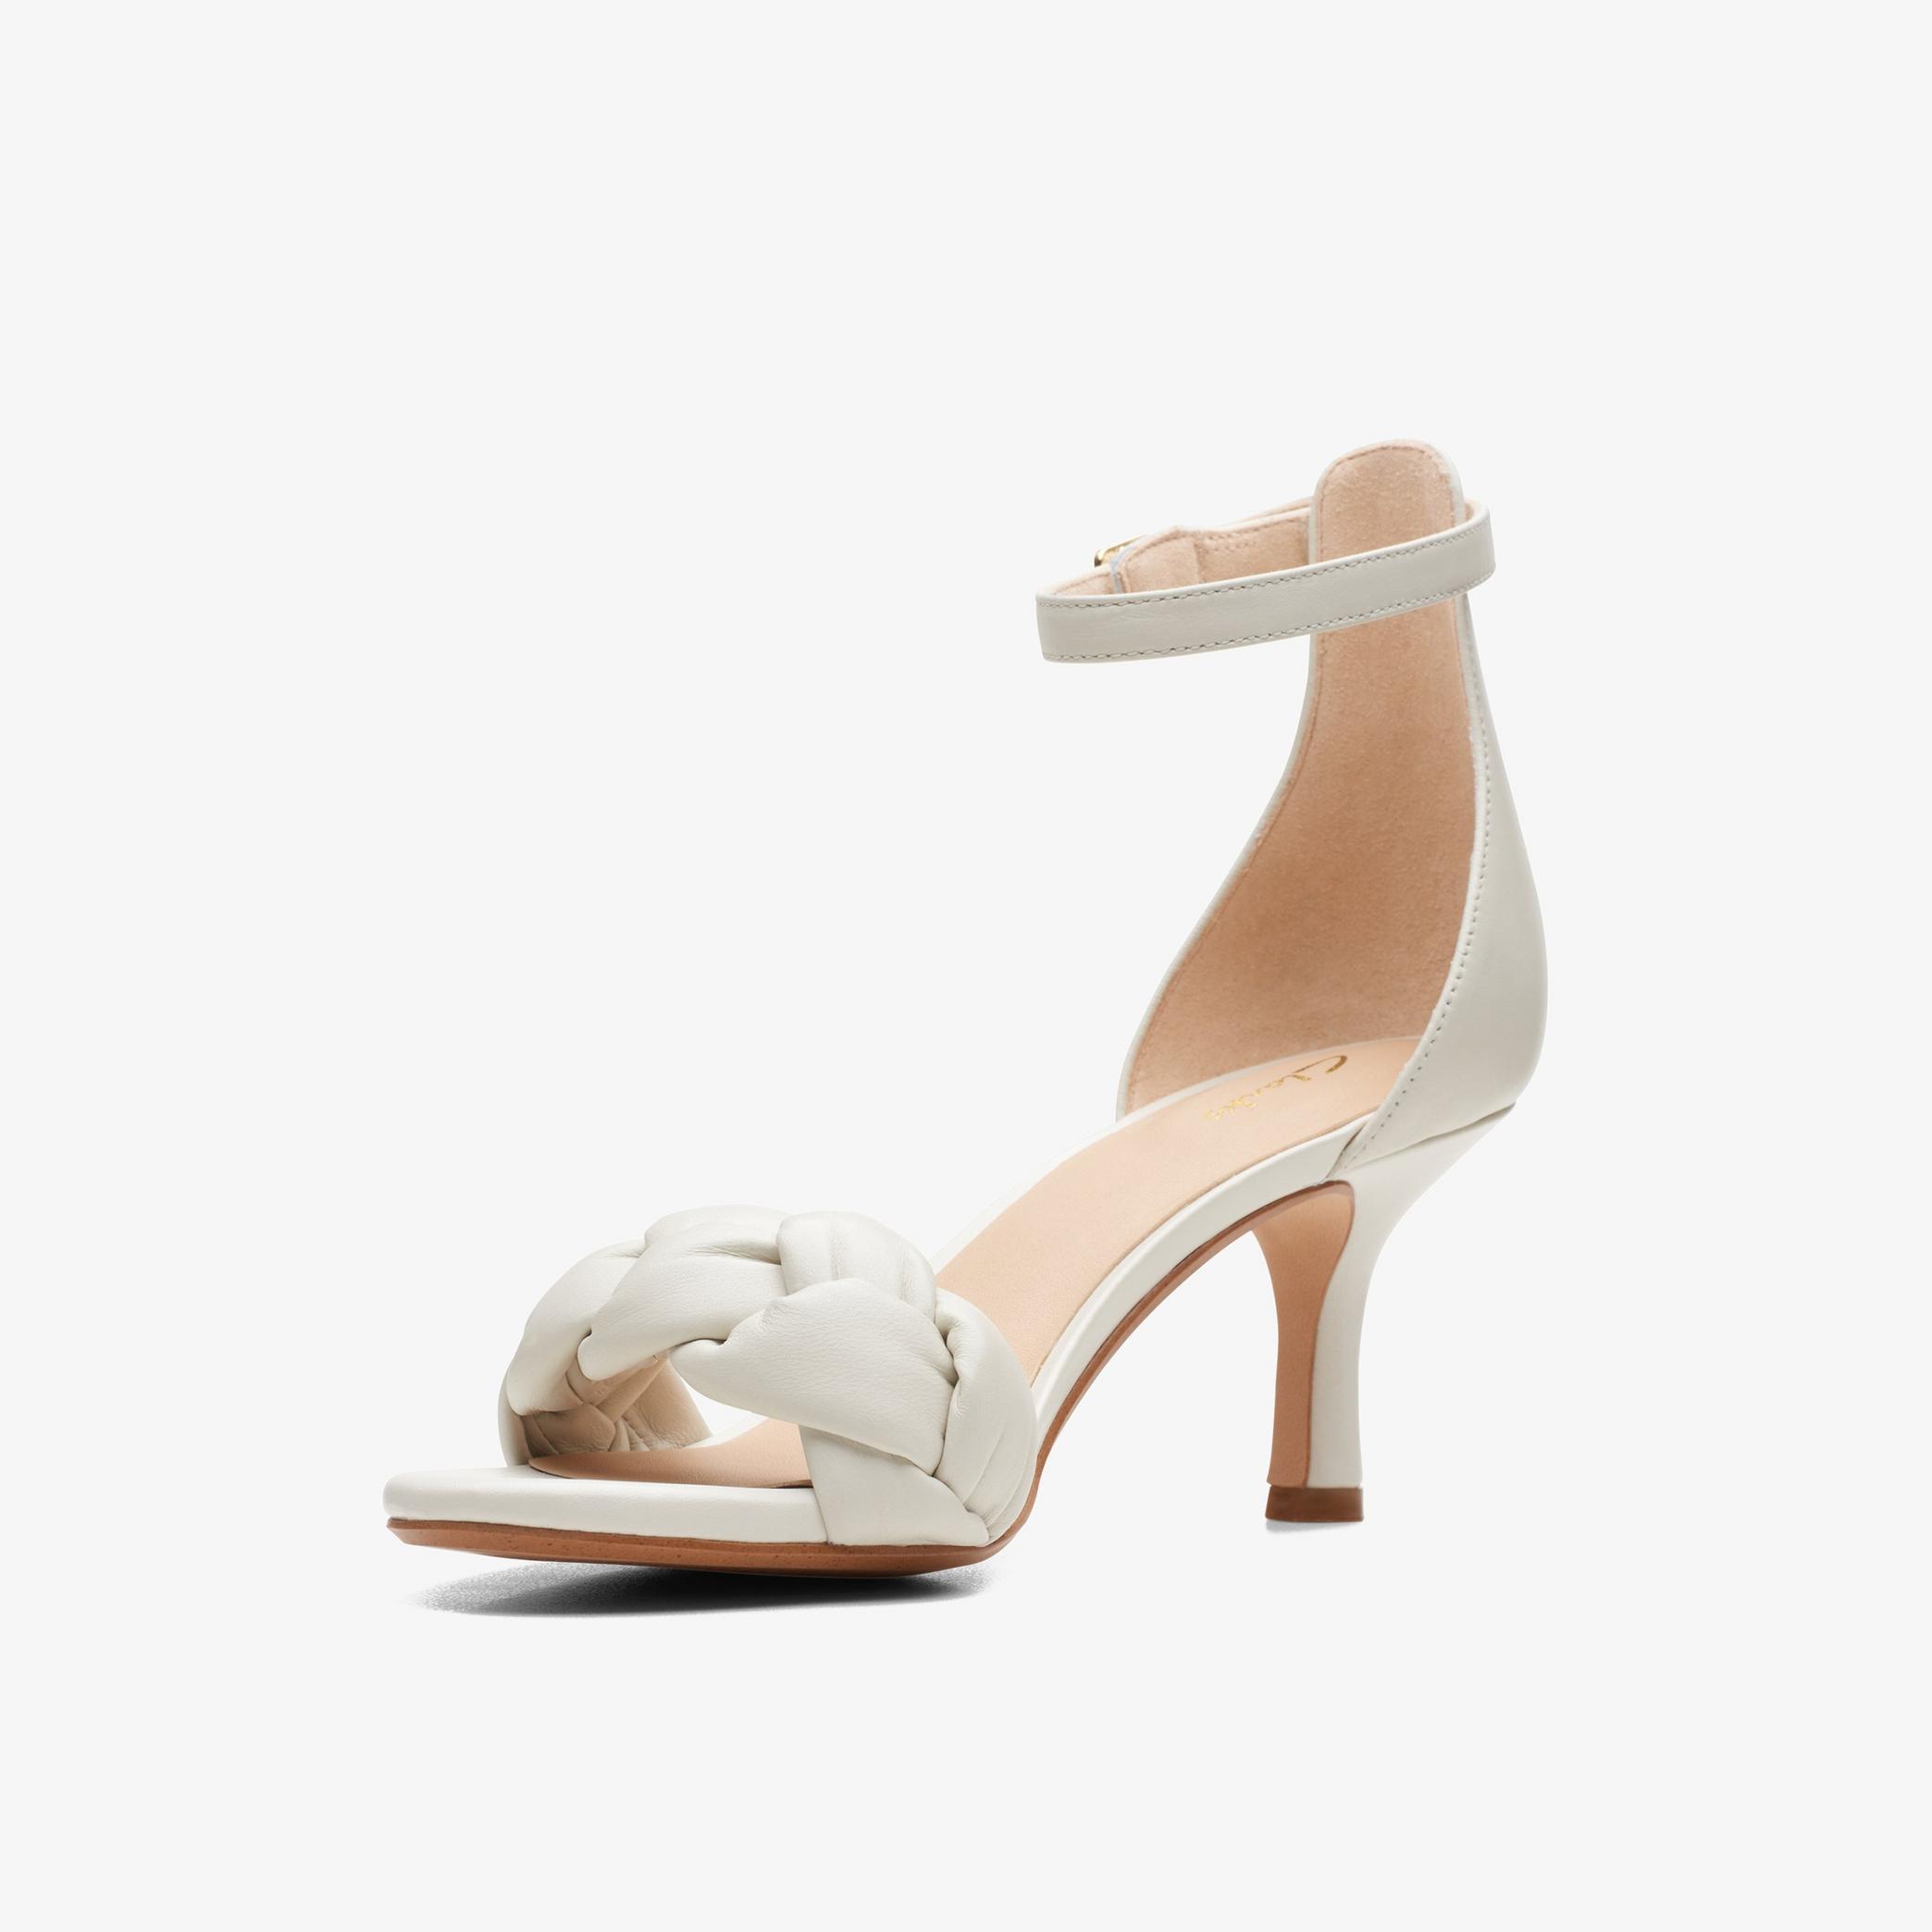 Amali Sandal White Leather Strappy Sandals, view 4 of 6